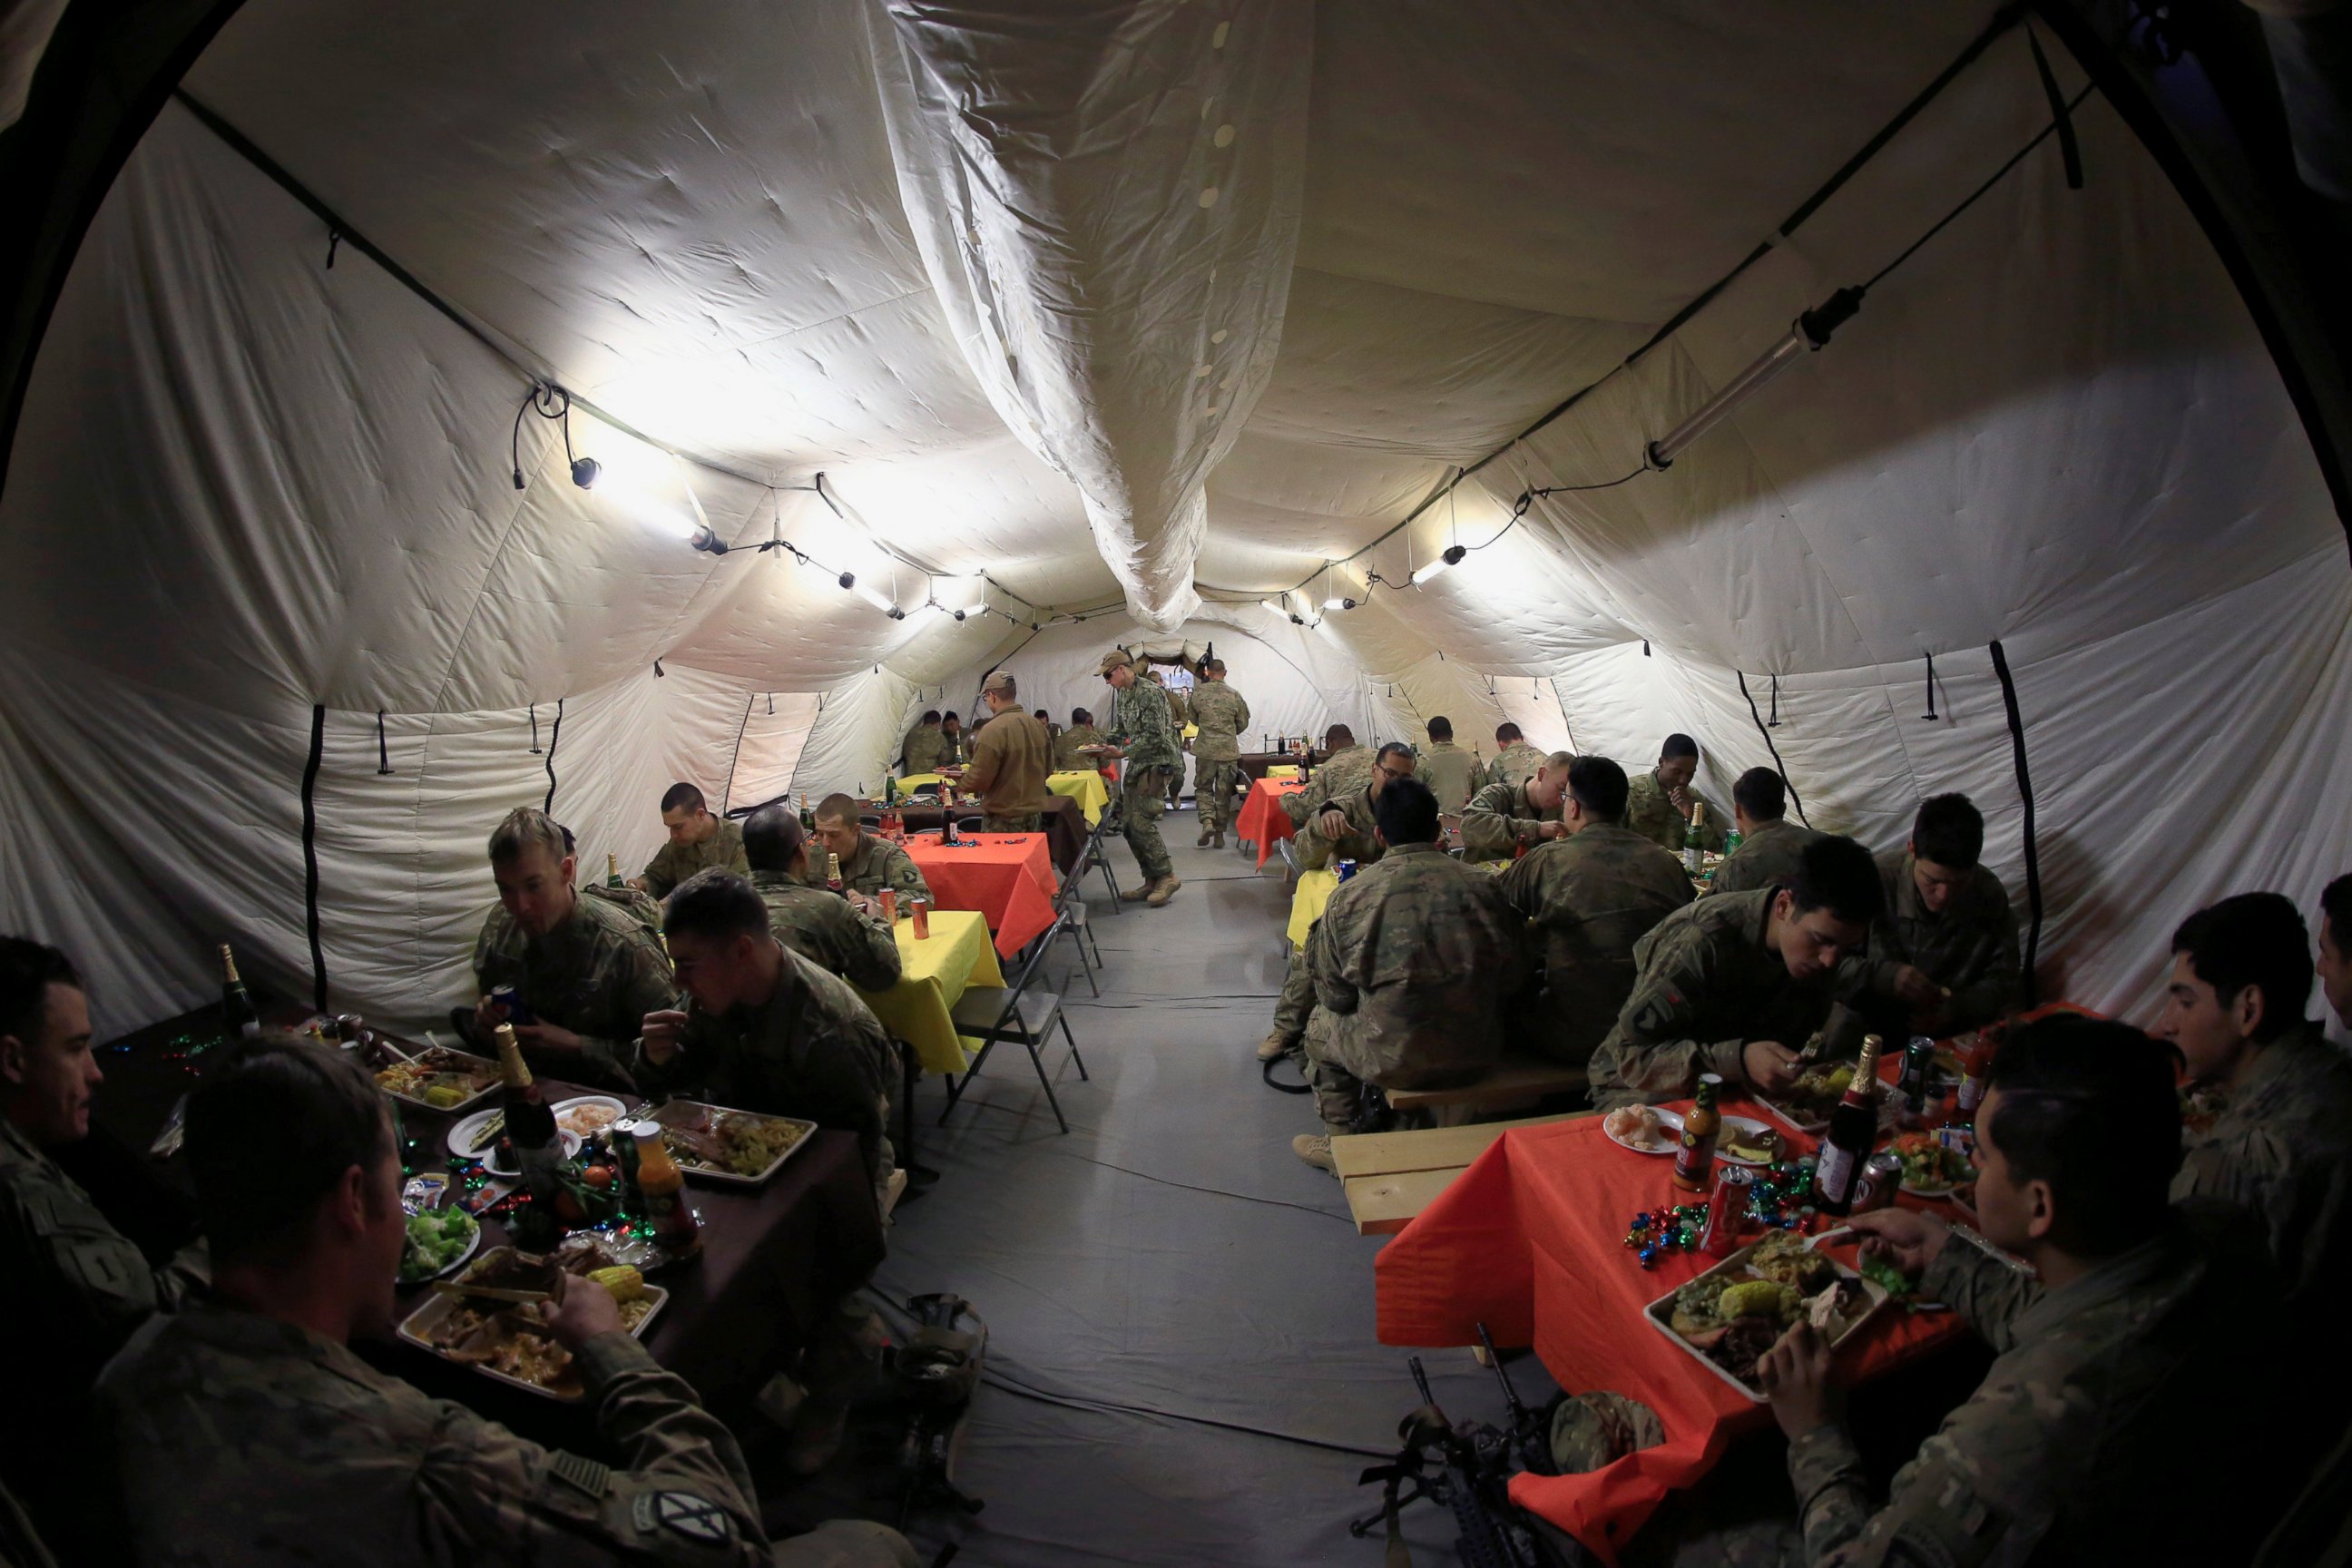 PHOTO: U.S. soldiers eat their meals to celebrate Thanksgiving Day at the U.S. army base in Qayyara, south of Mosul, Iraq, Nov. 24, 2016.